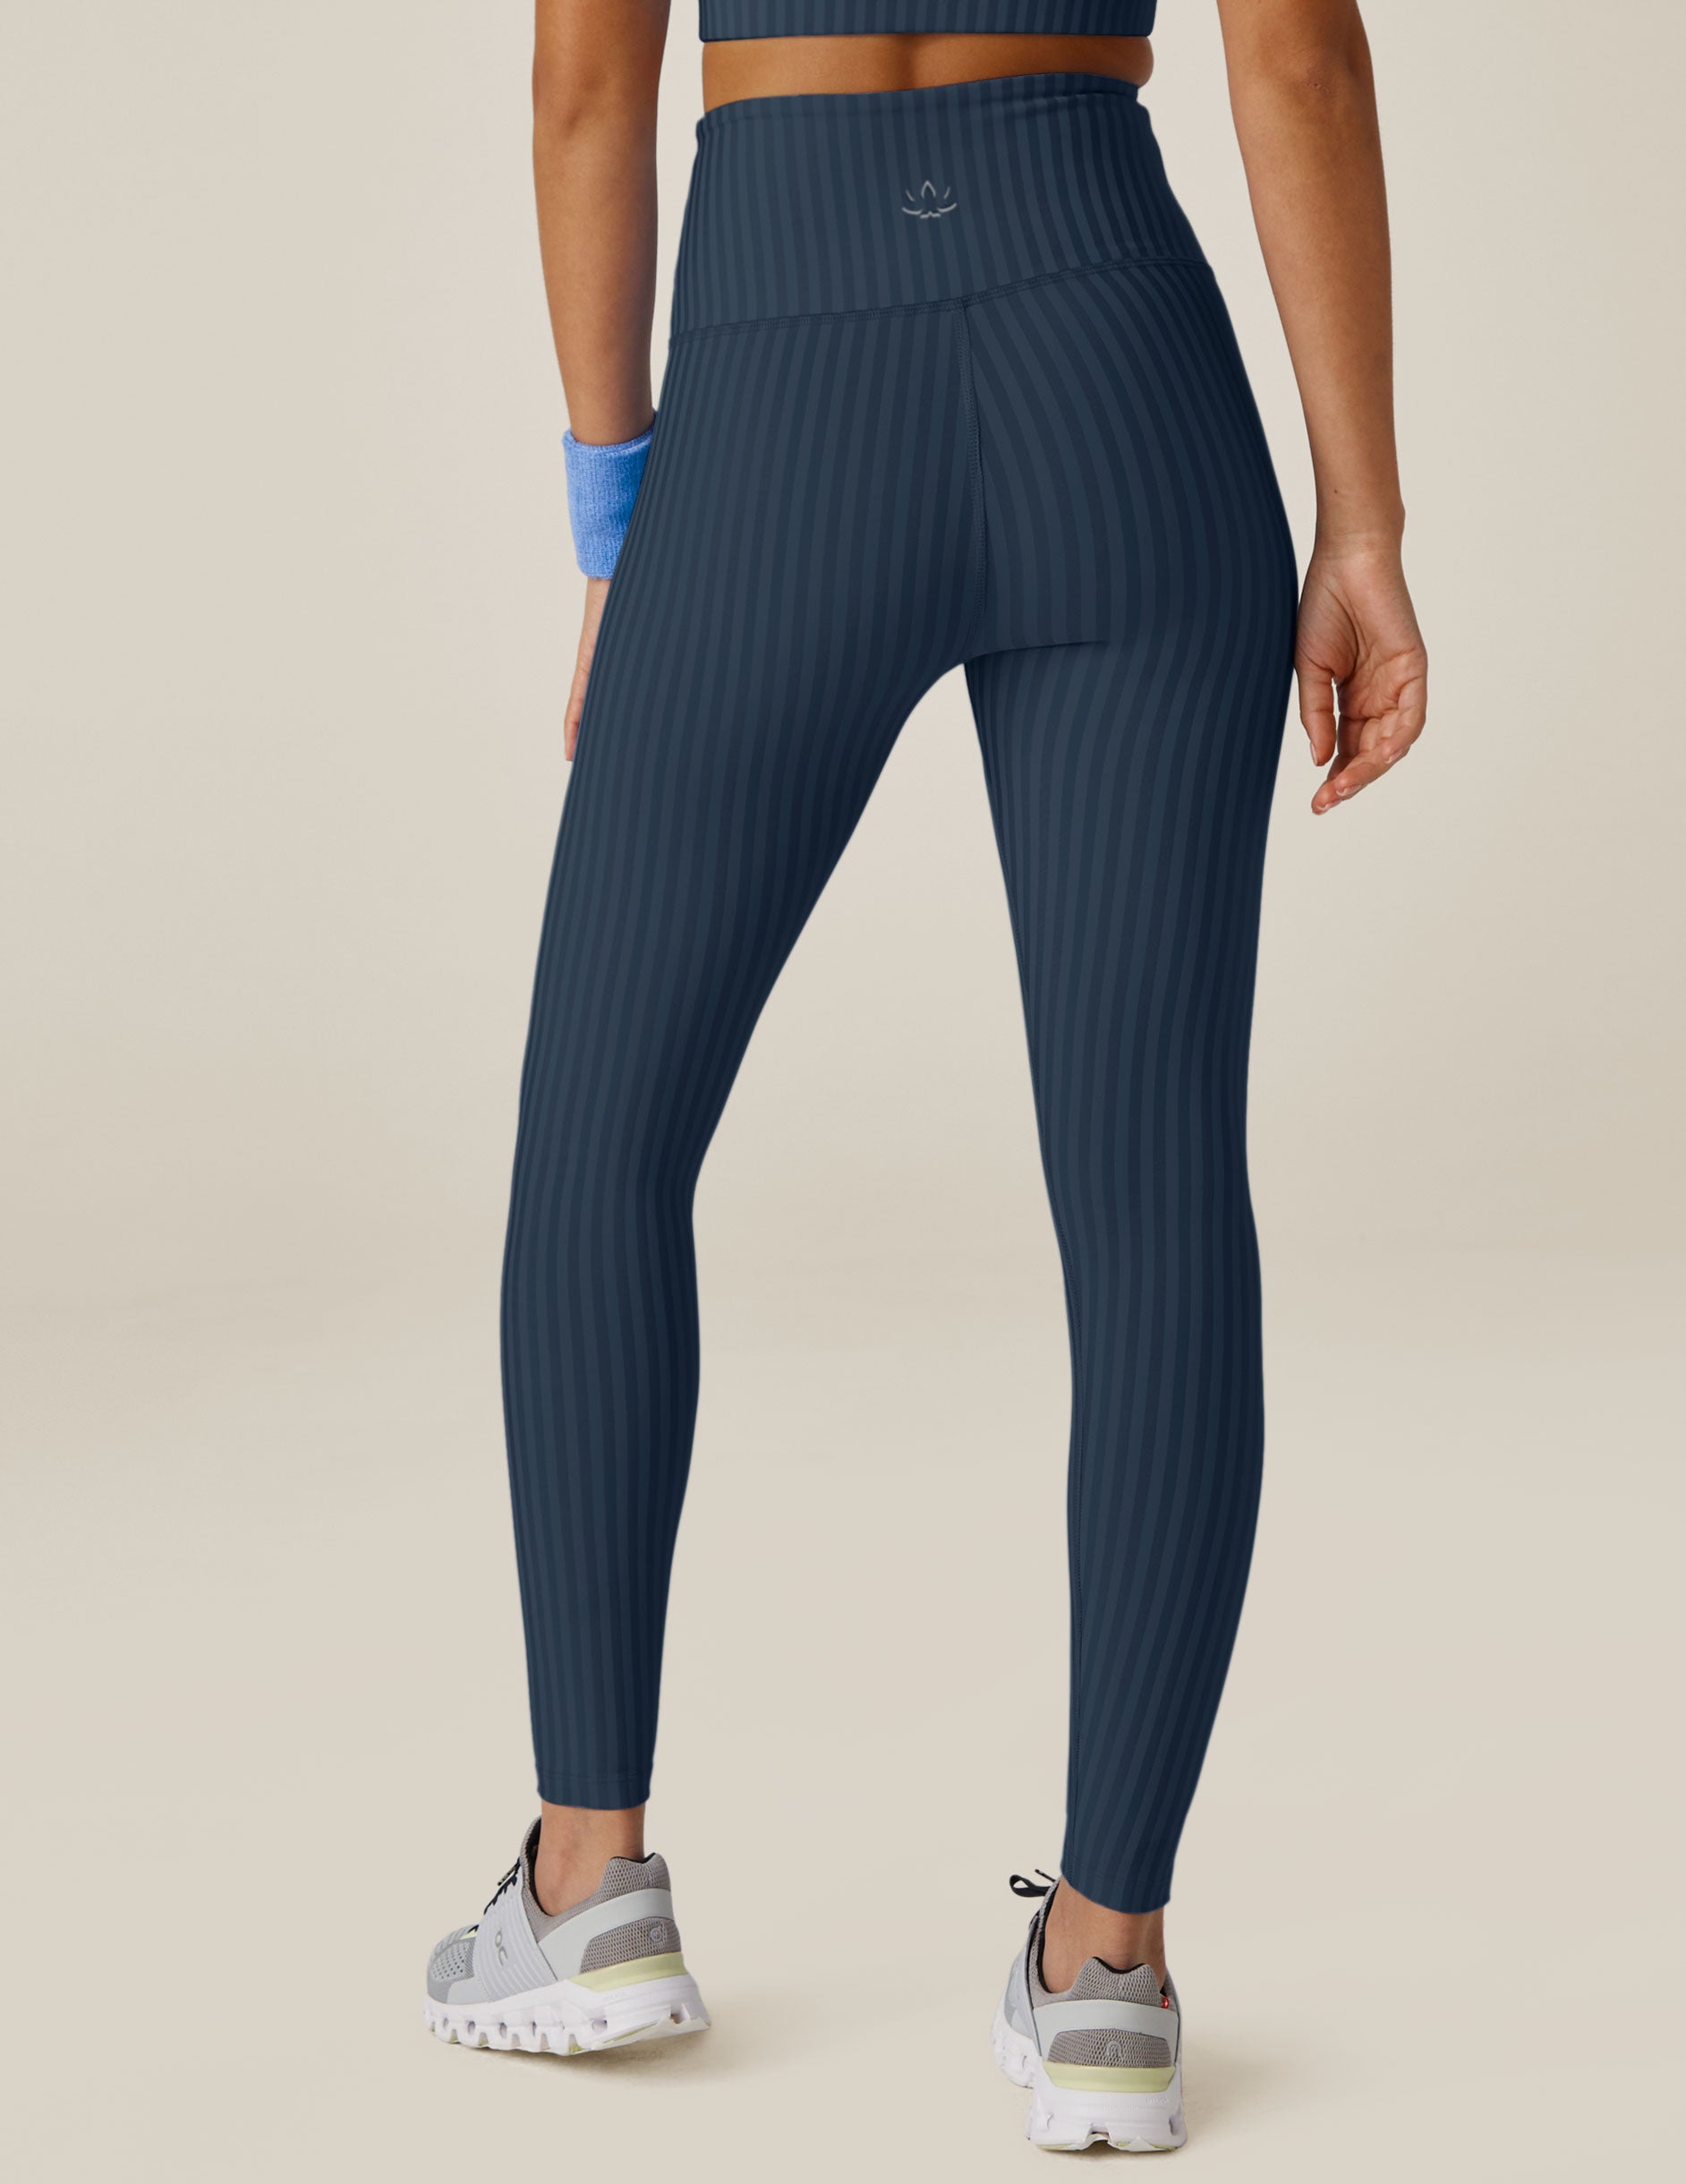 Leggings  Stripe A Pose – Constantly Varied Gear